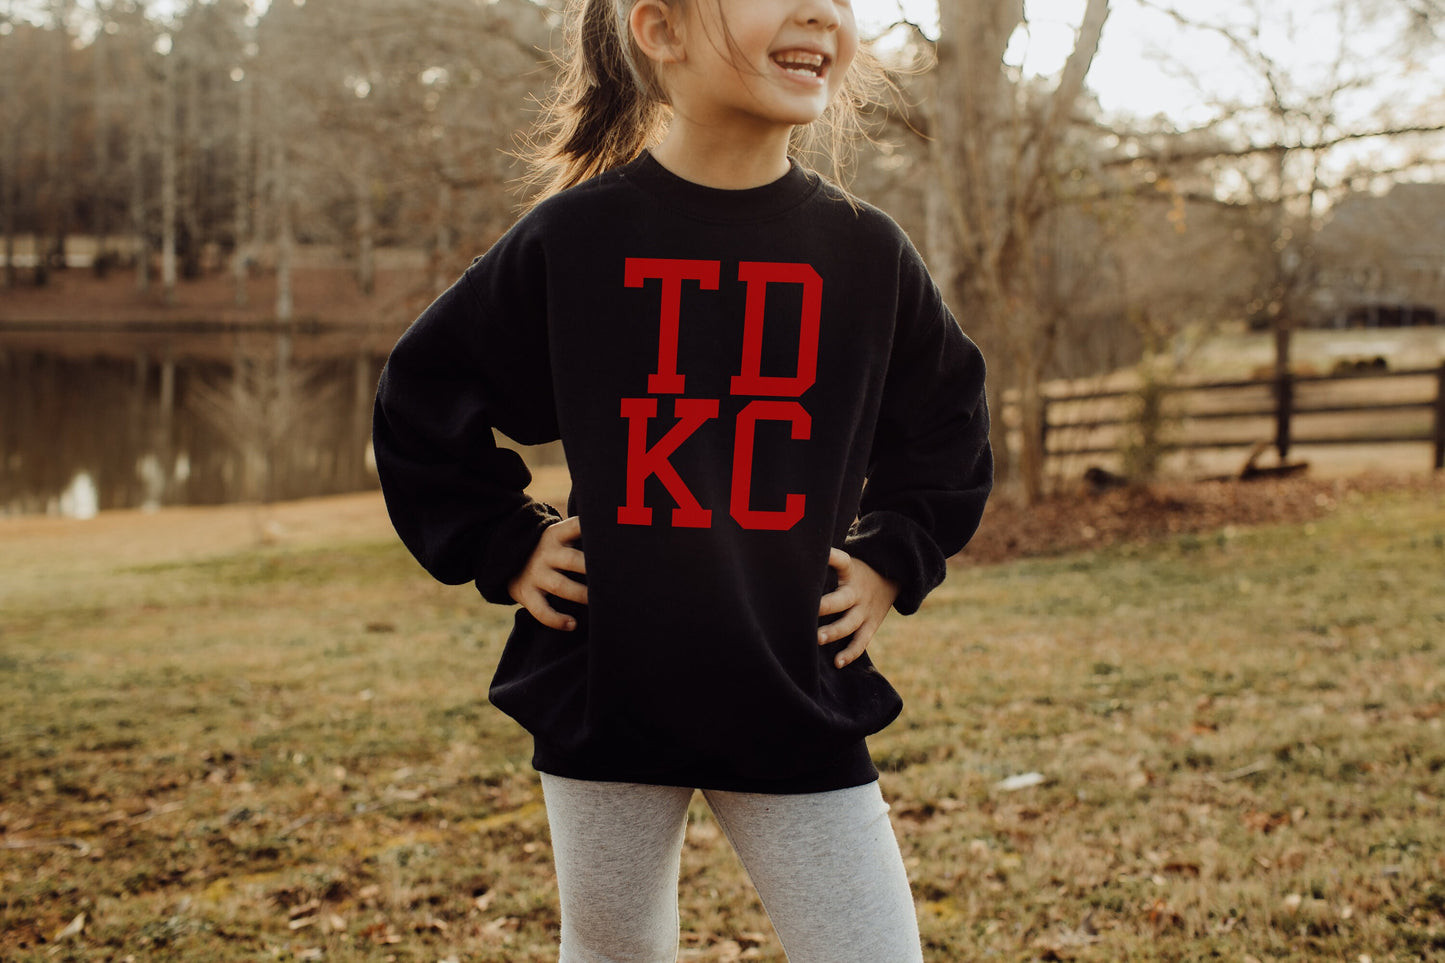 MADE In KC TDKC Kansas City Toddler Tee | Perfect for Game Day! | Super Soft! Red Black White Sweatshirt Long & Short Sleeve T-Shirt T td kc